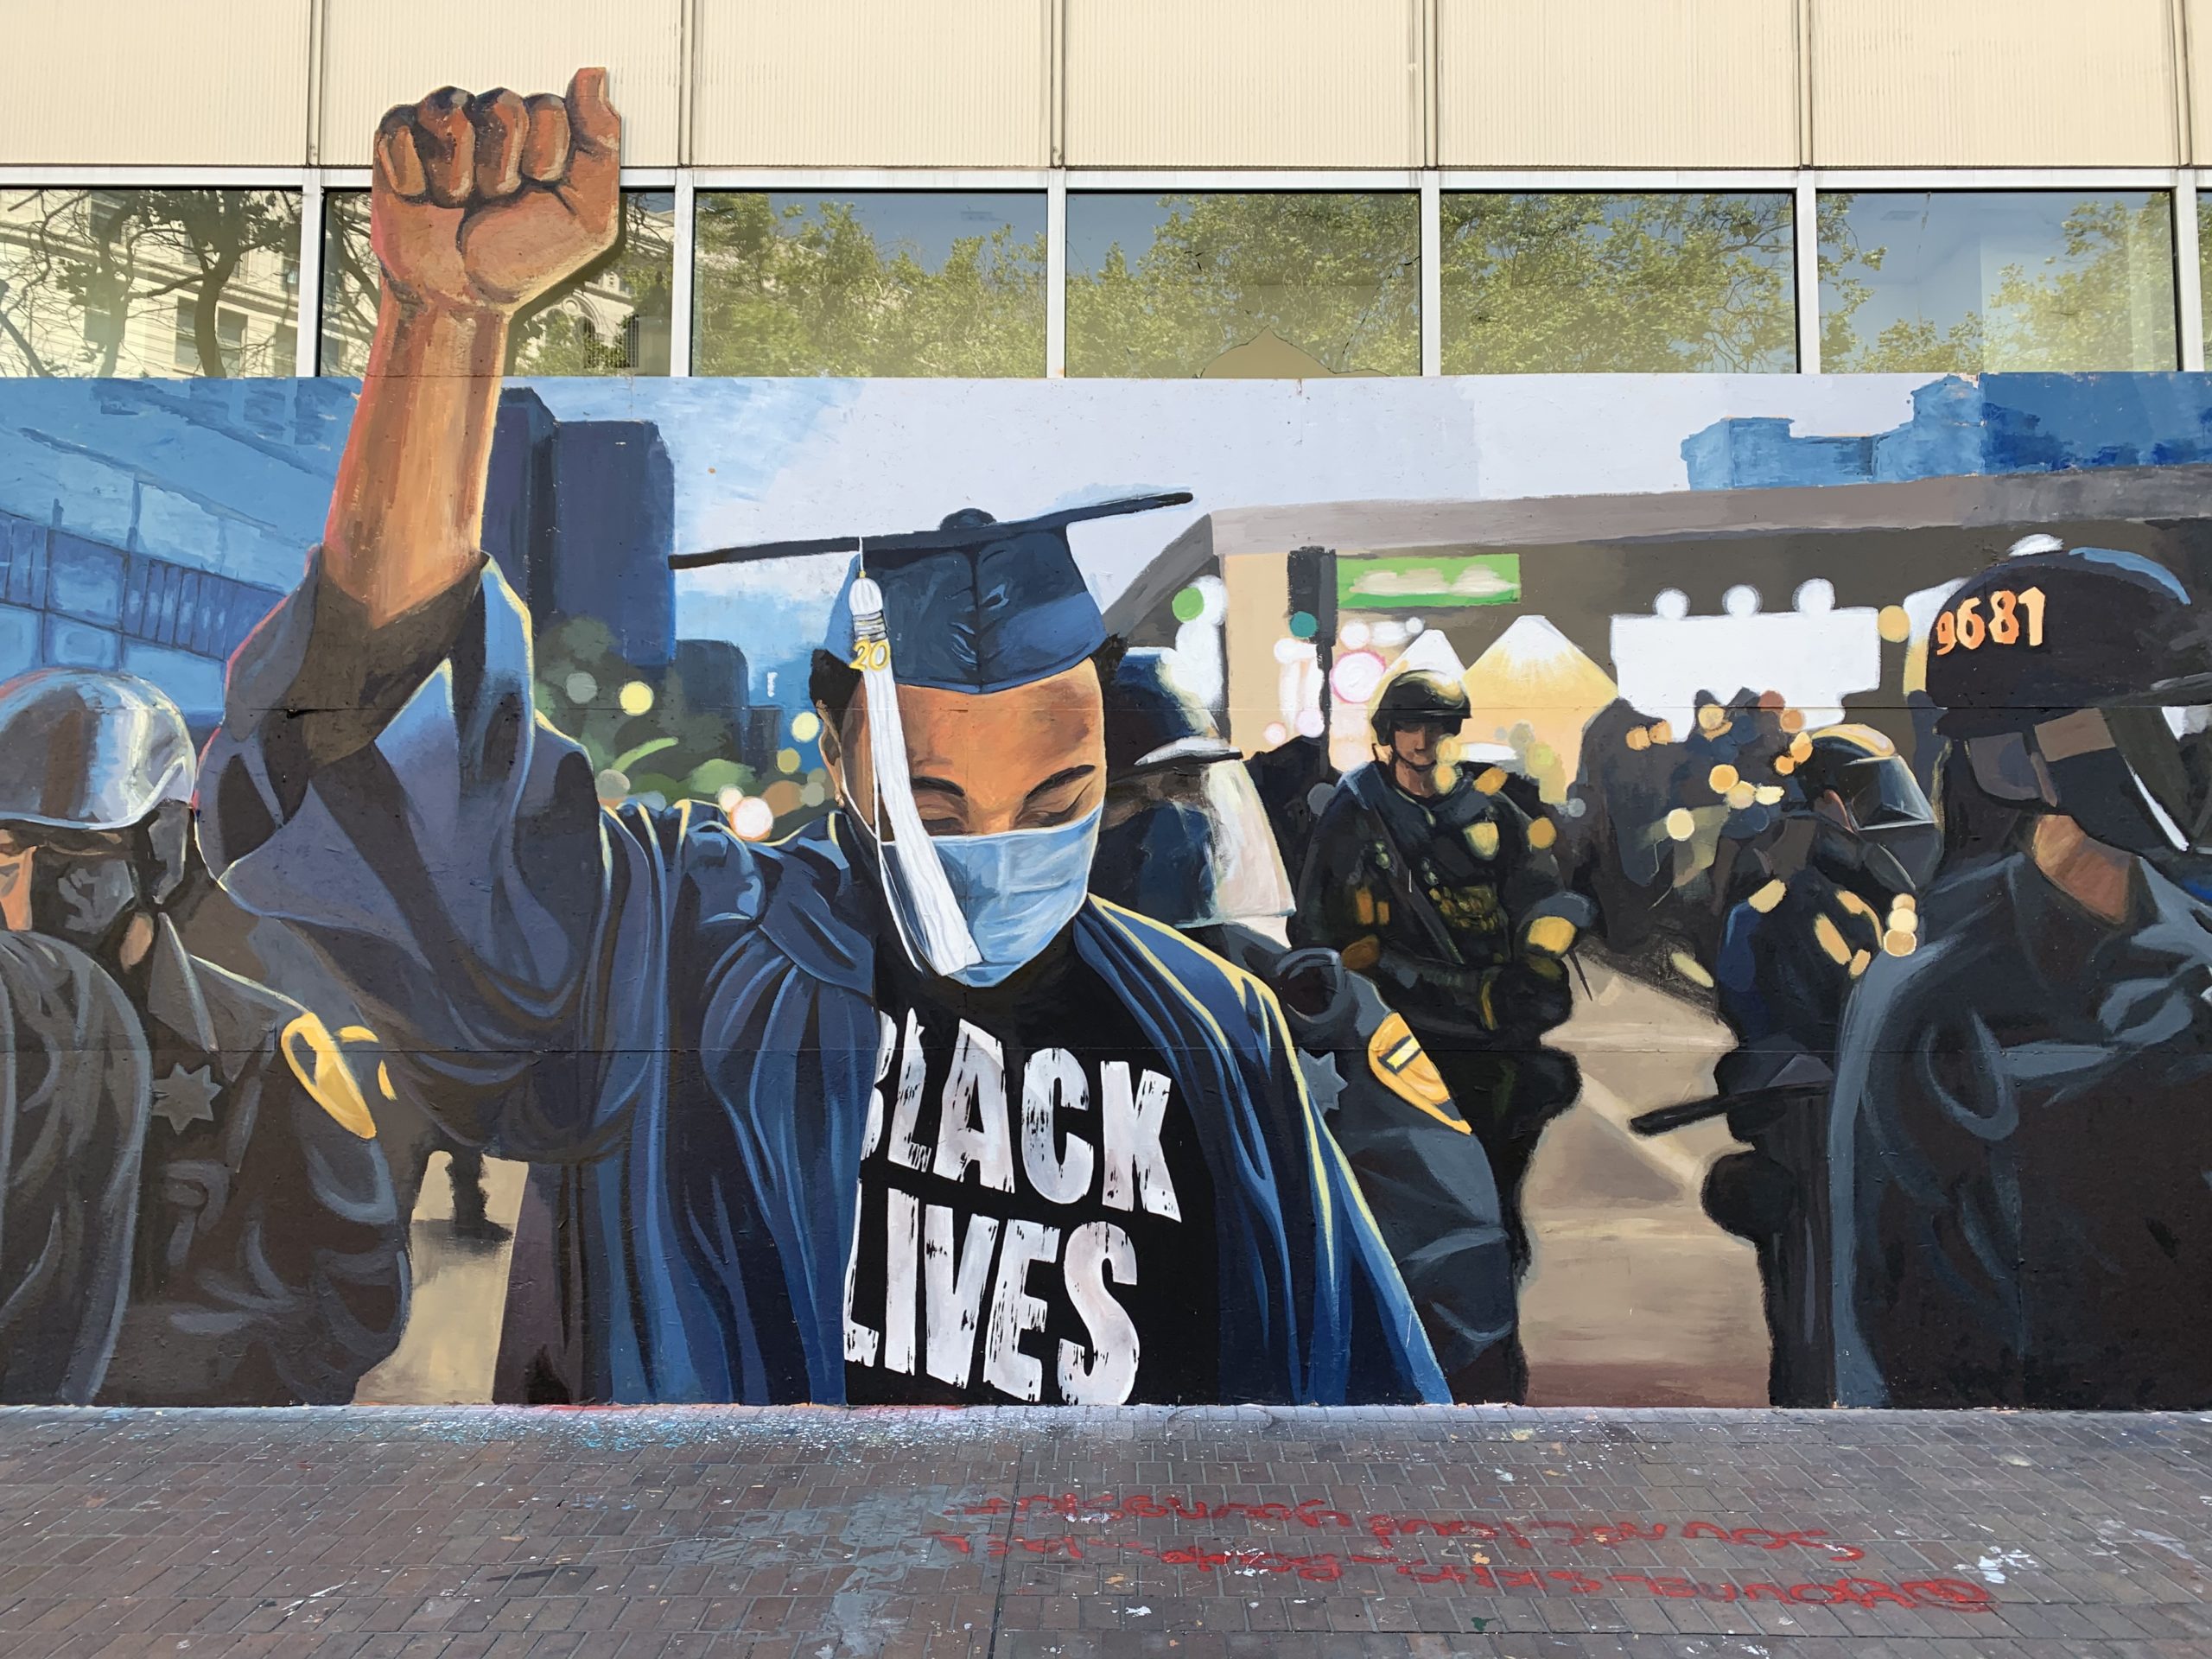 Mural with a young black man in a cap and gown with fist up surrounded by police in military gear.